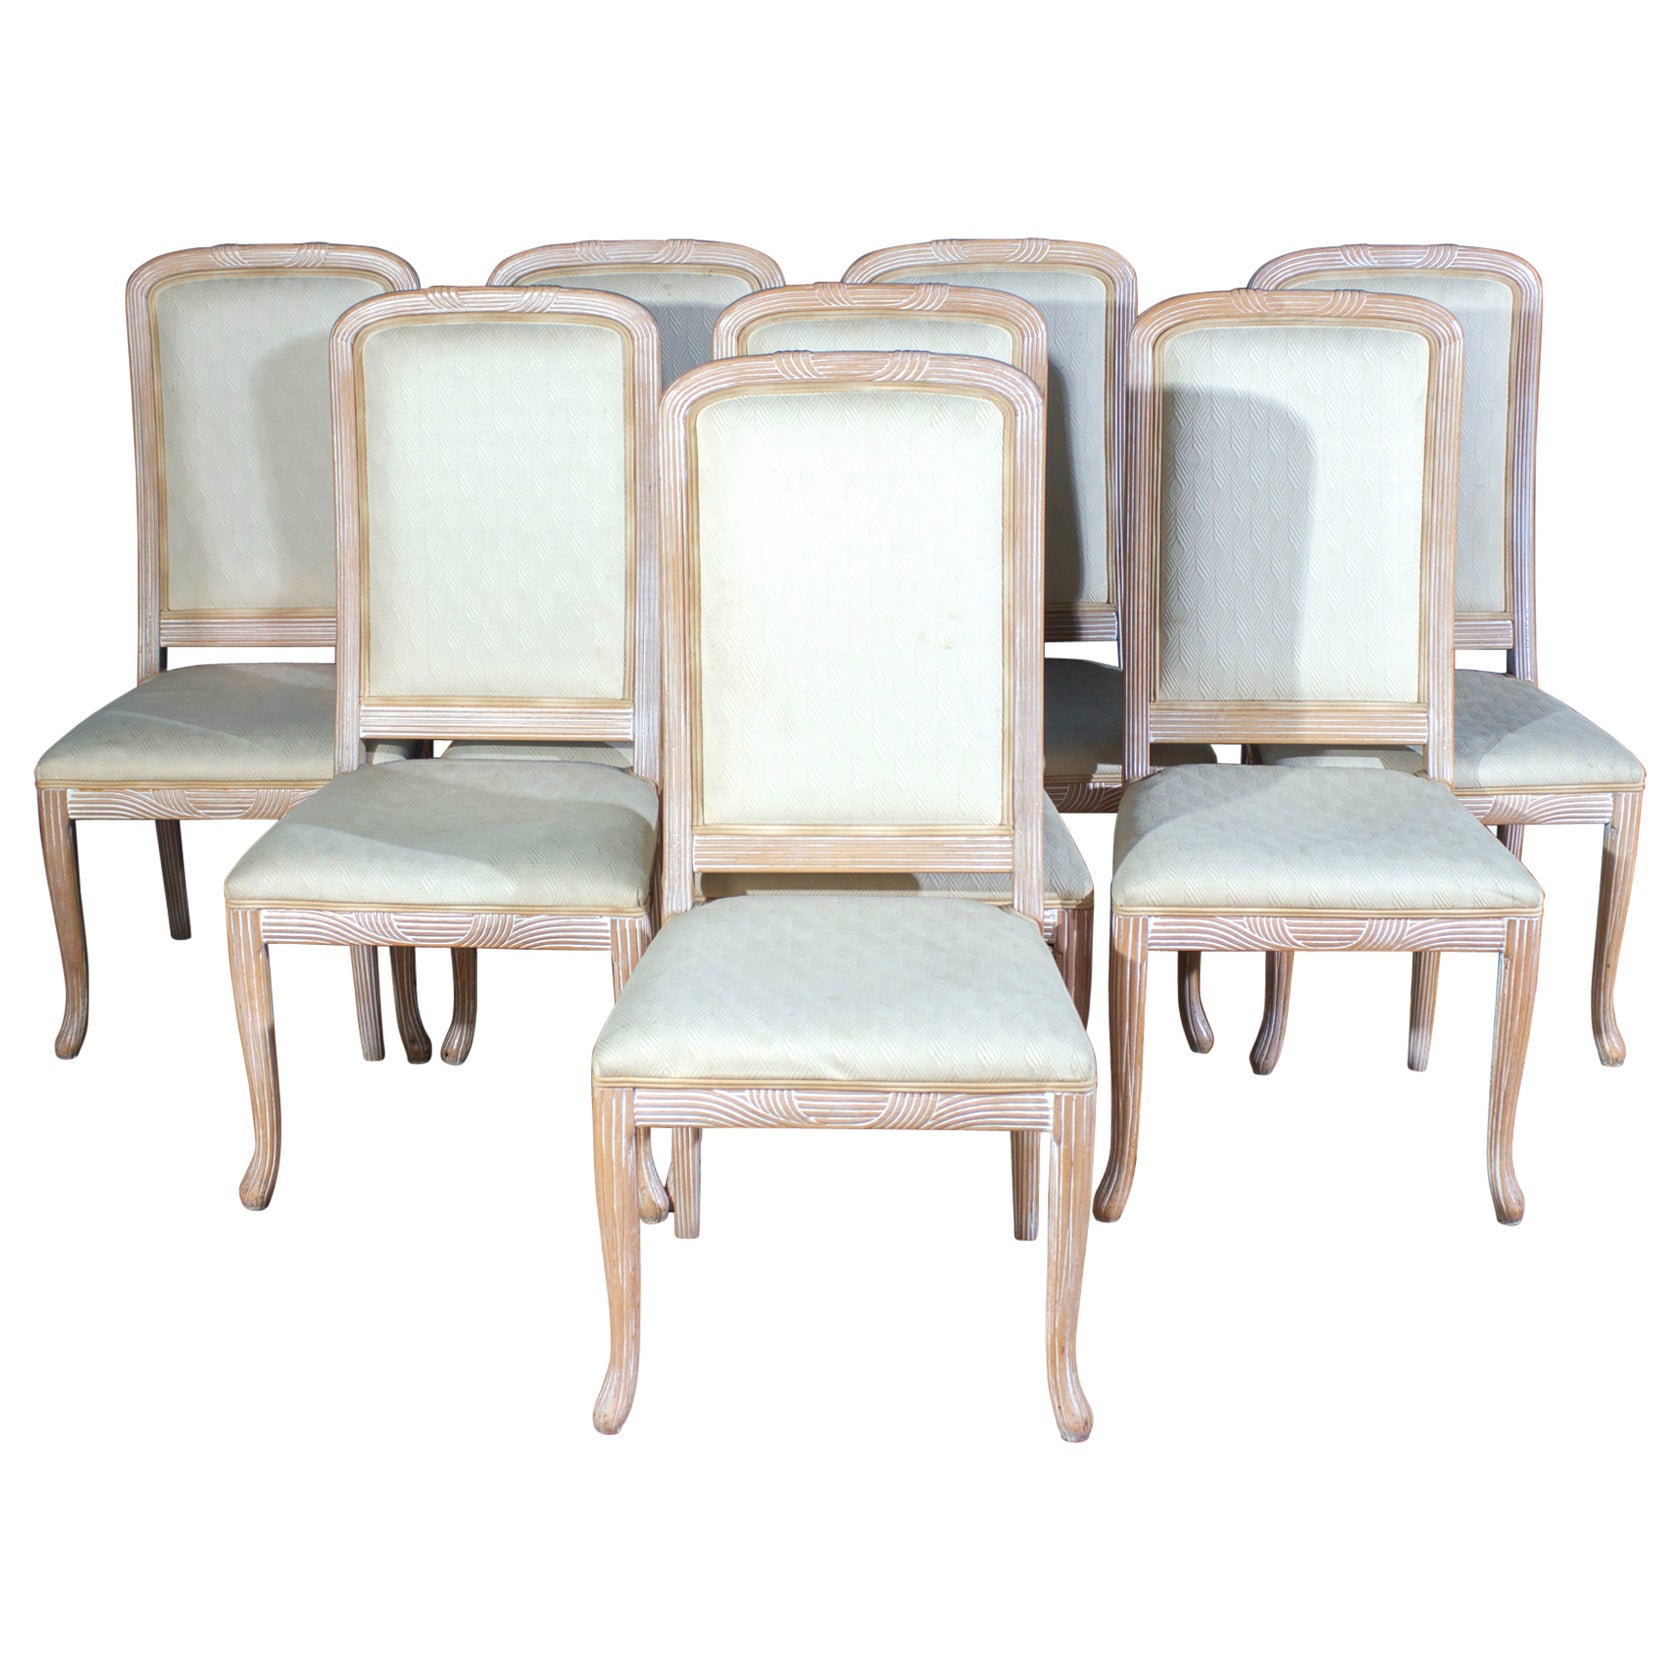 Fine Set of 8 Italian White Decapé Wood Chairs, 1970s For Sale